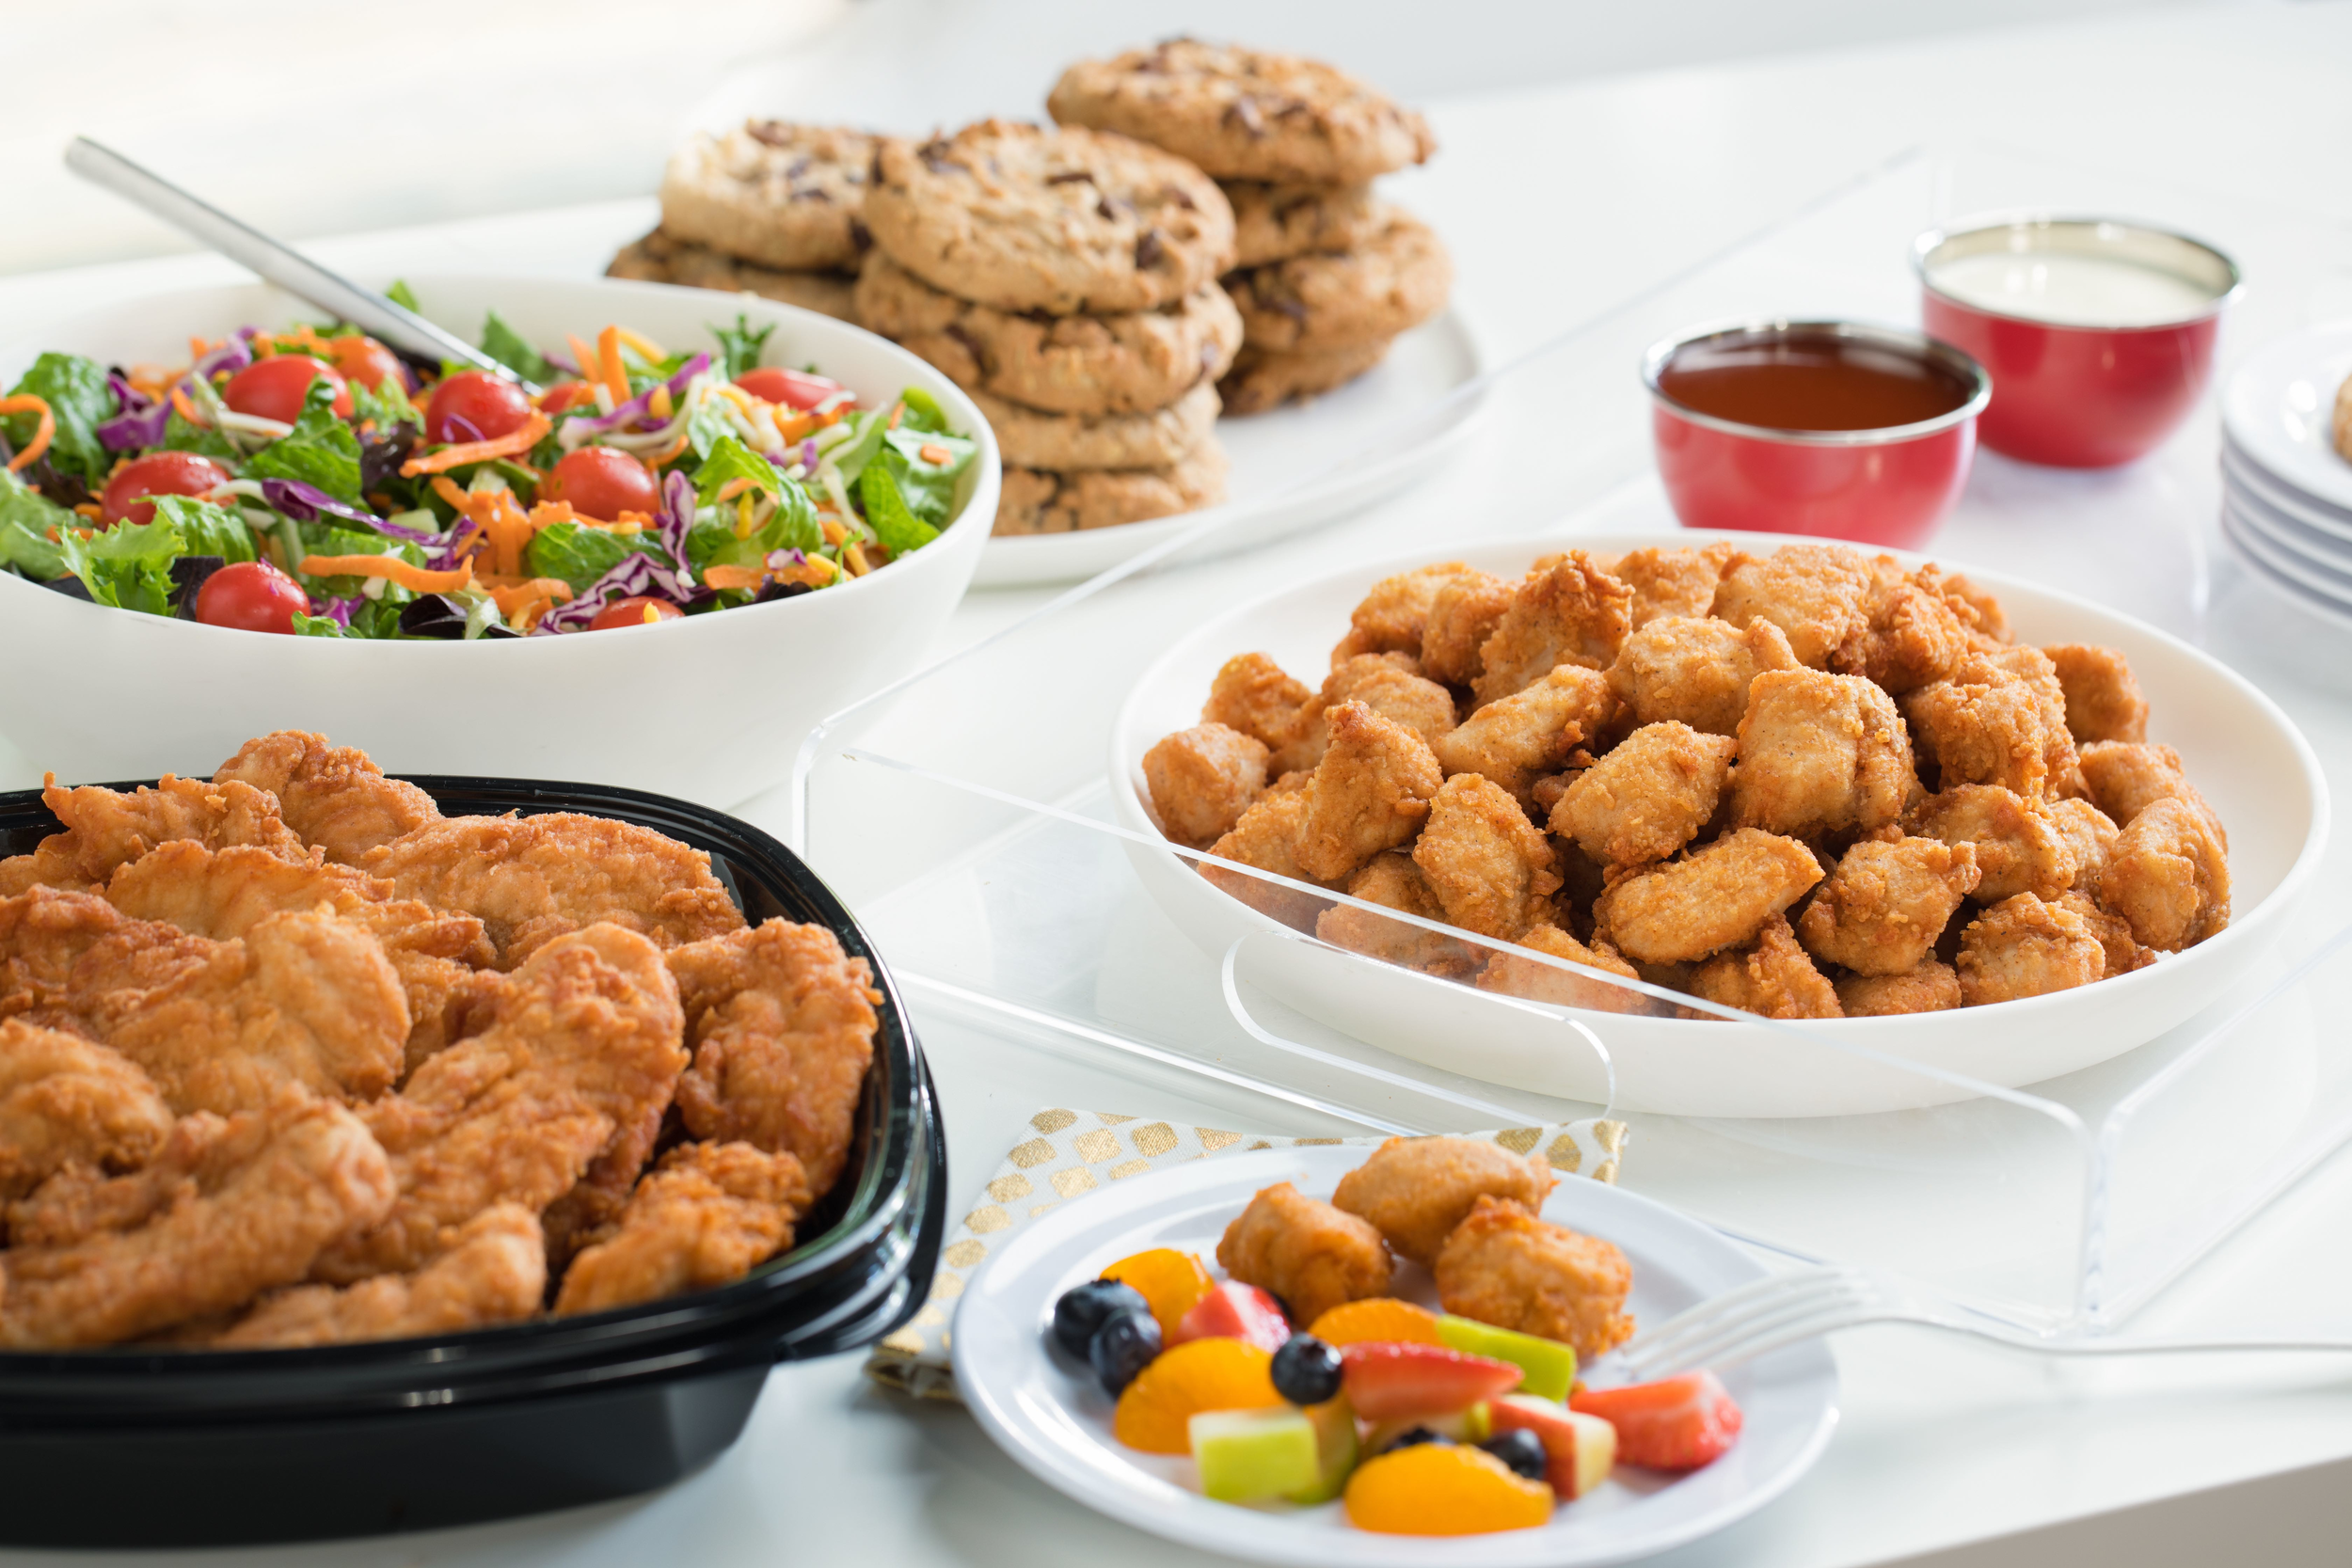 Chick-fil-A catering with strips, nuggets, salad, cookies and fruit